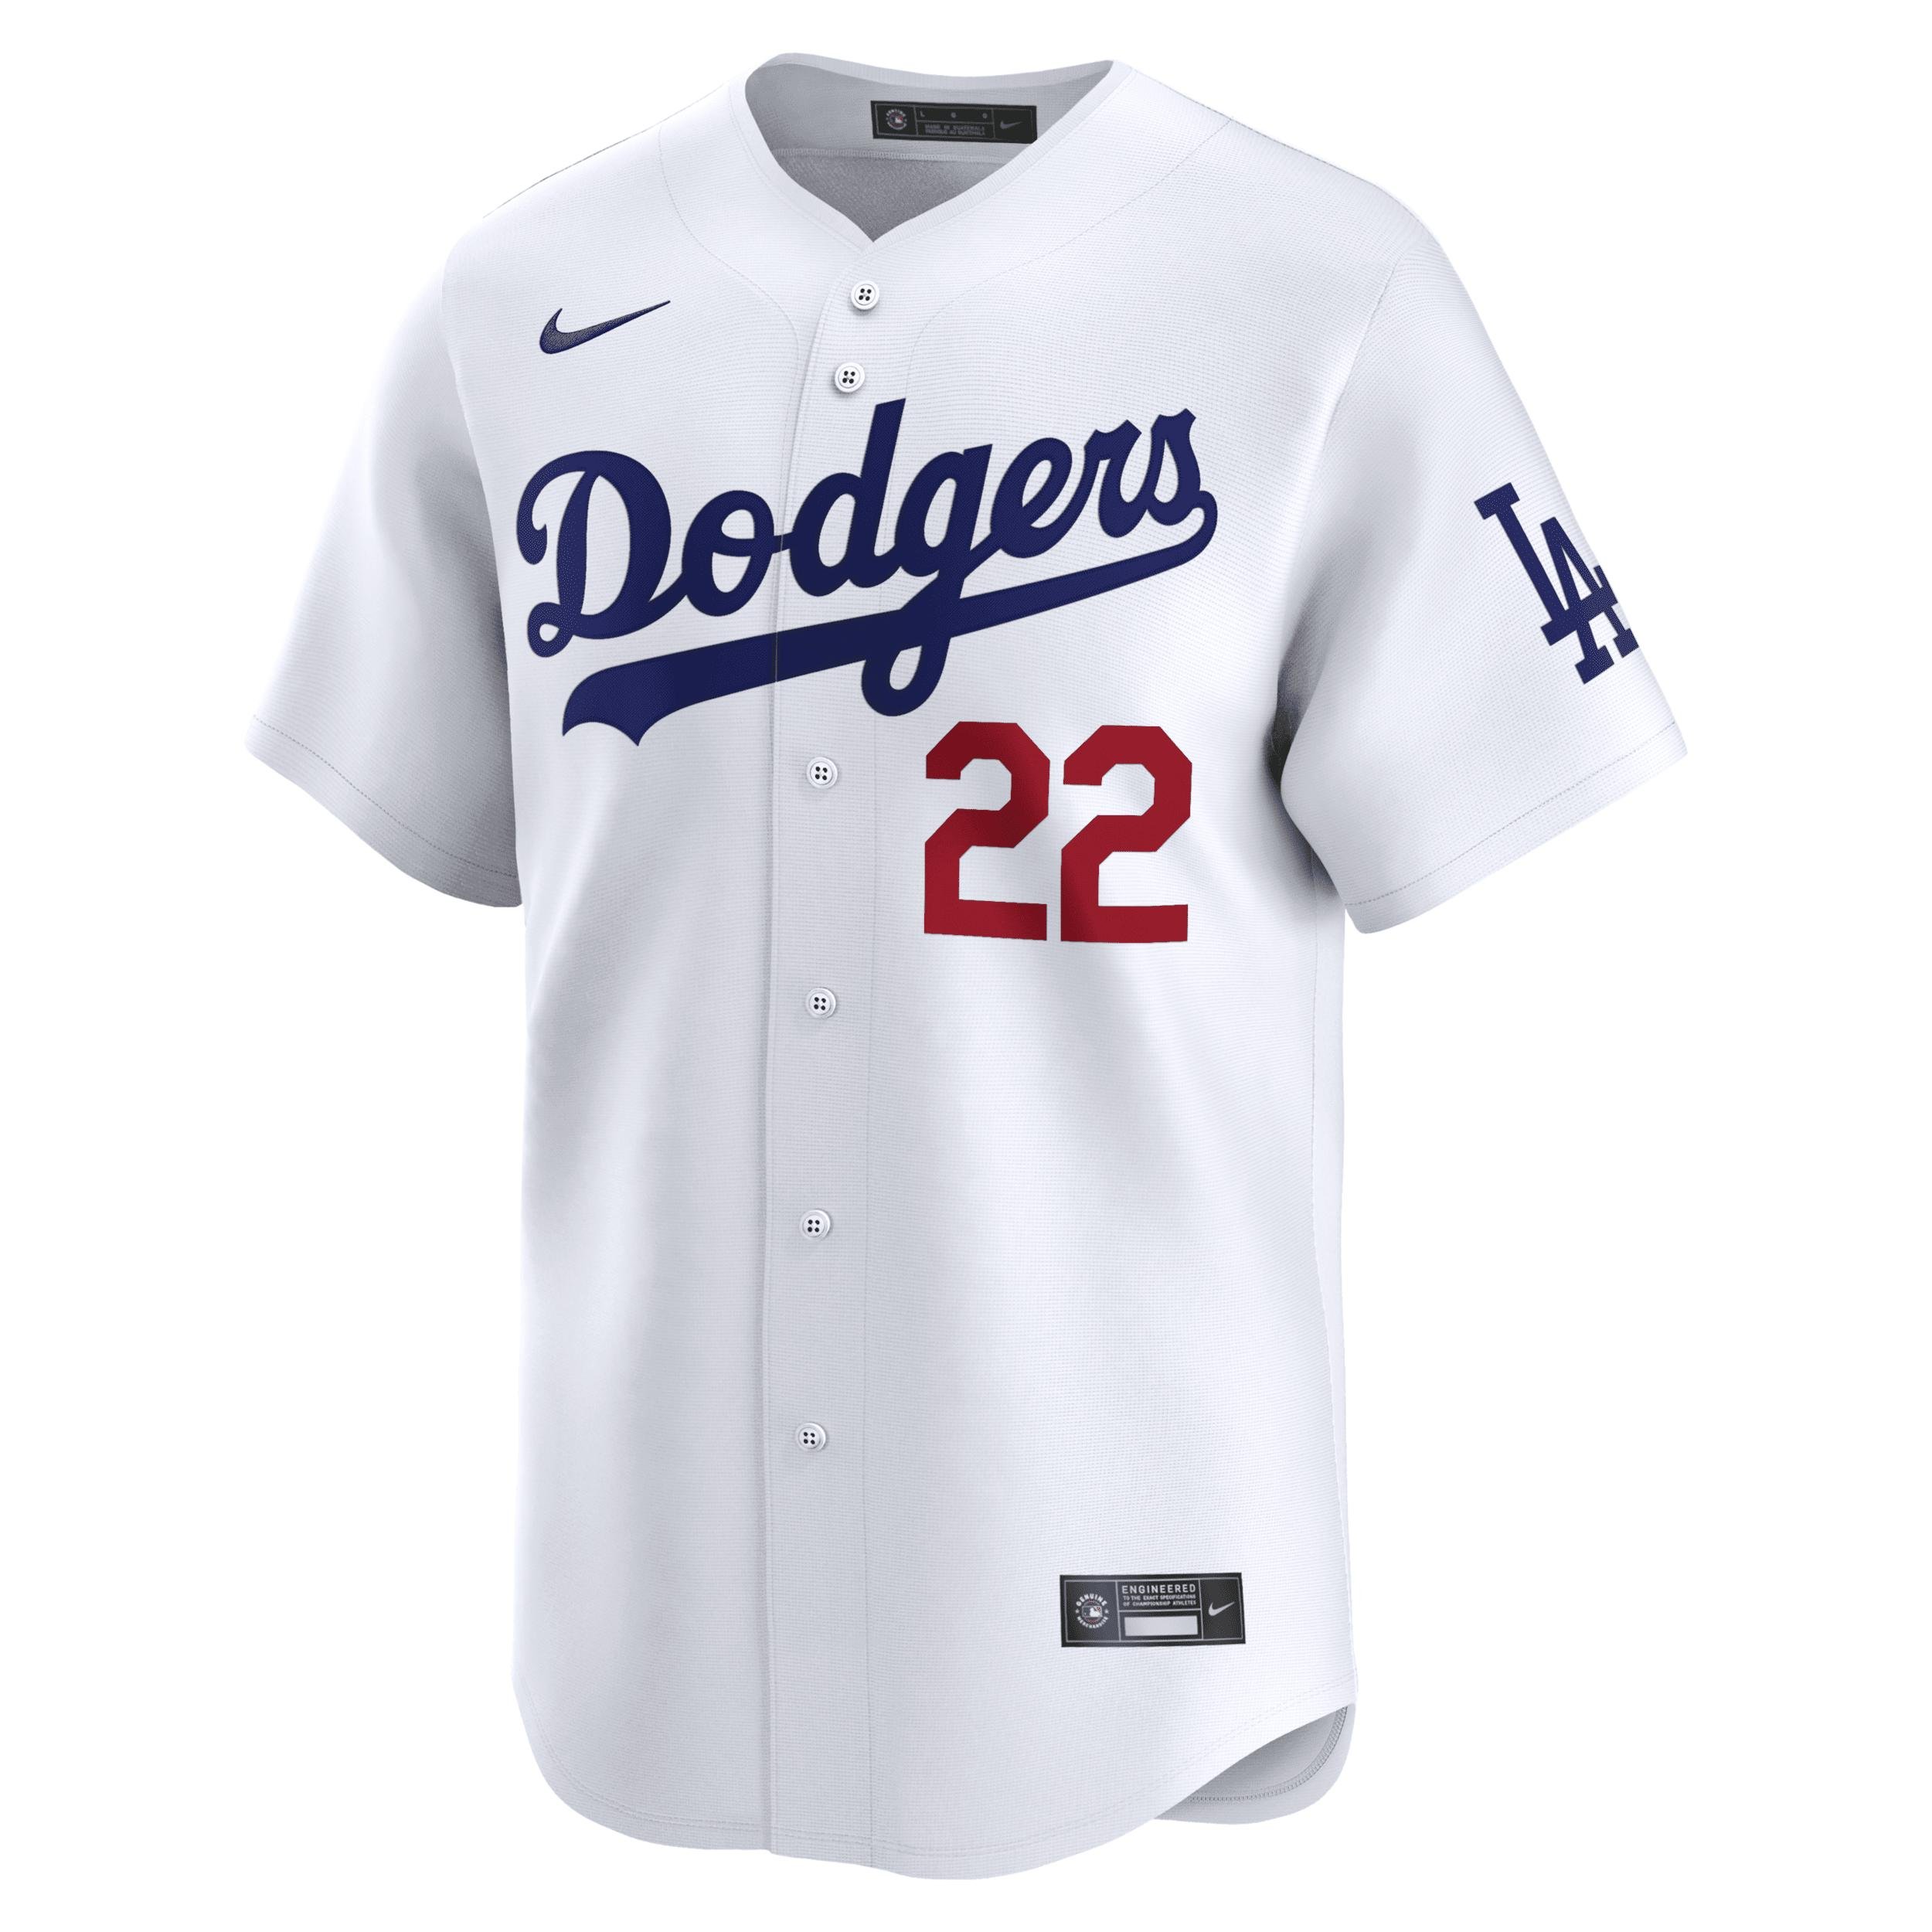 Clayton Kershaw Los Angeles Dodgers Nike Men's Dri-FIT ADV MLB Limited Jersey by NIKE